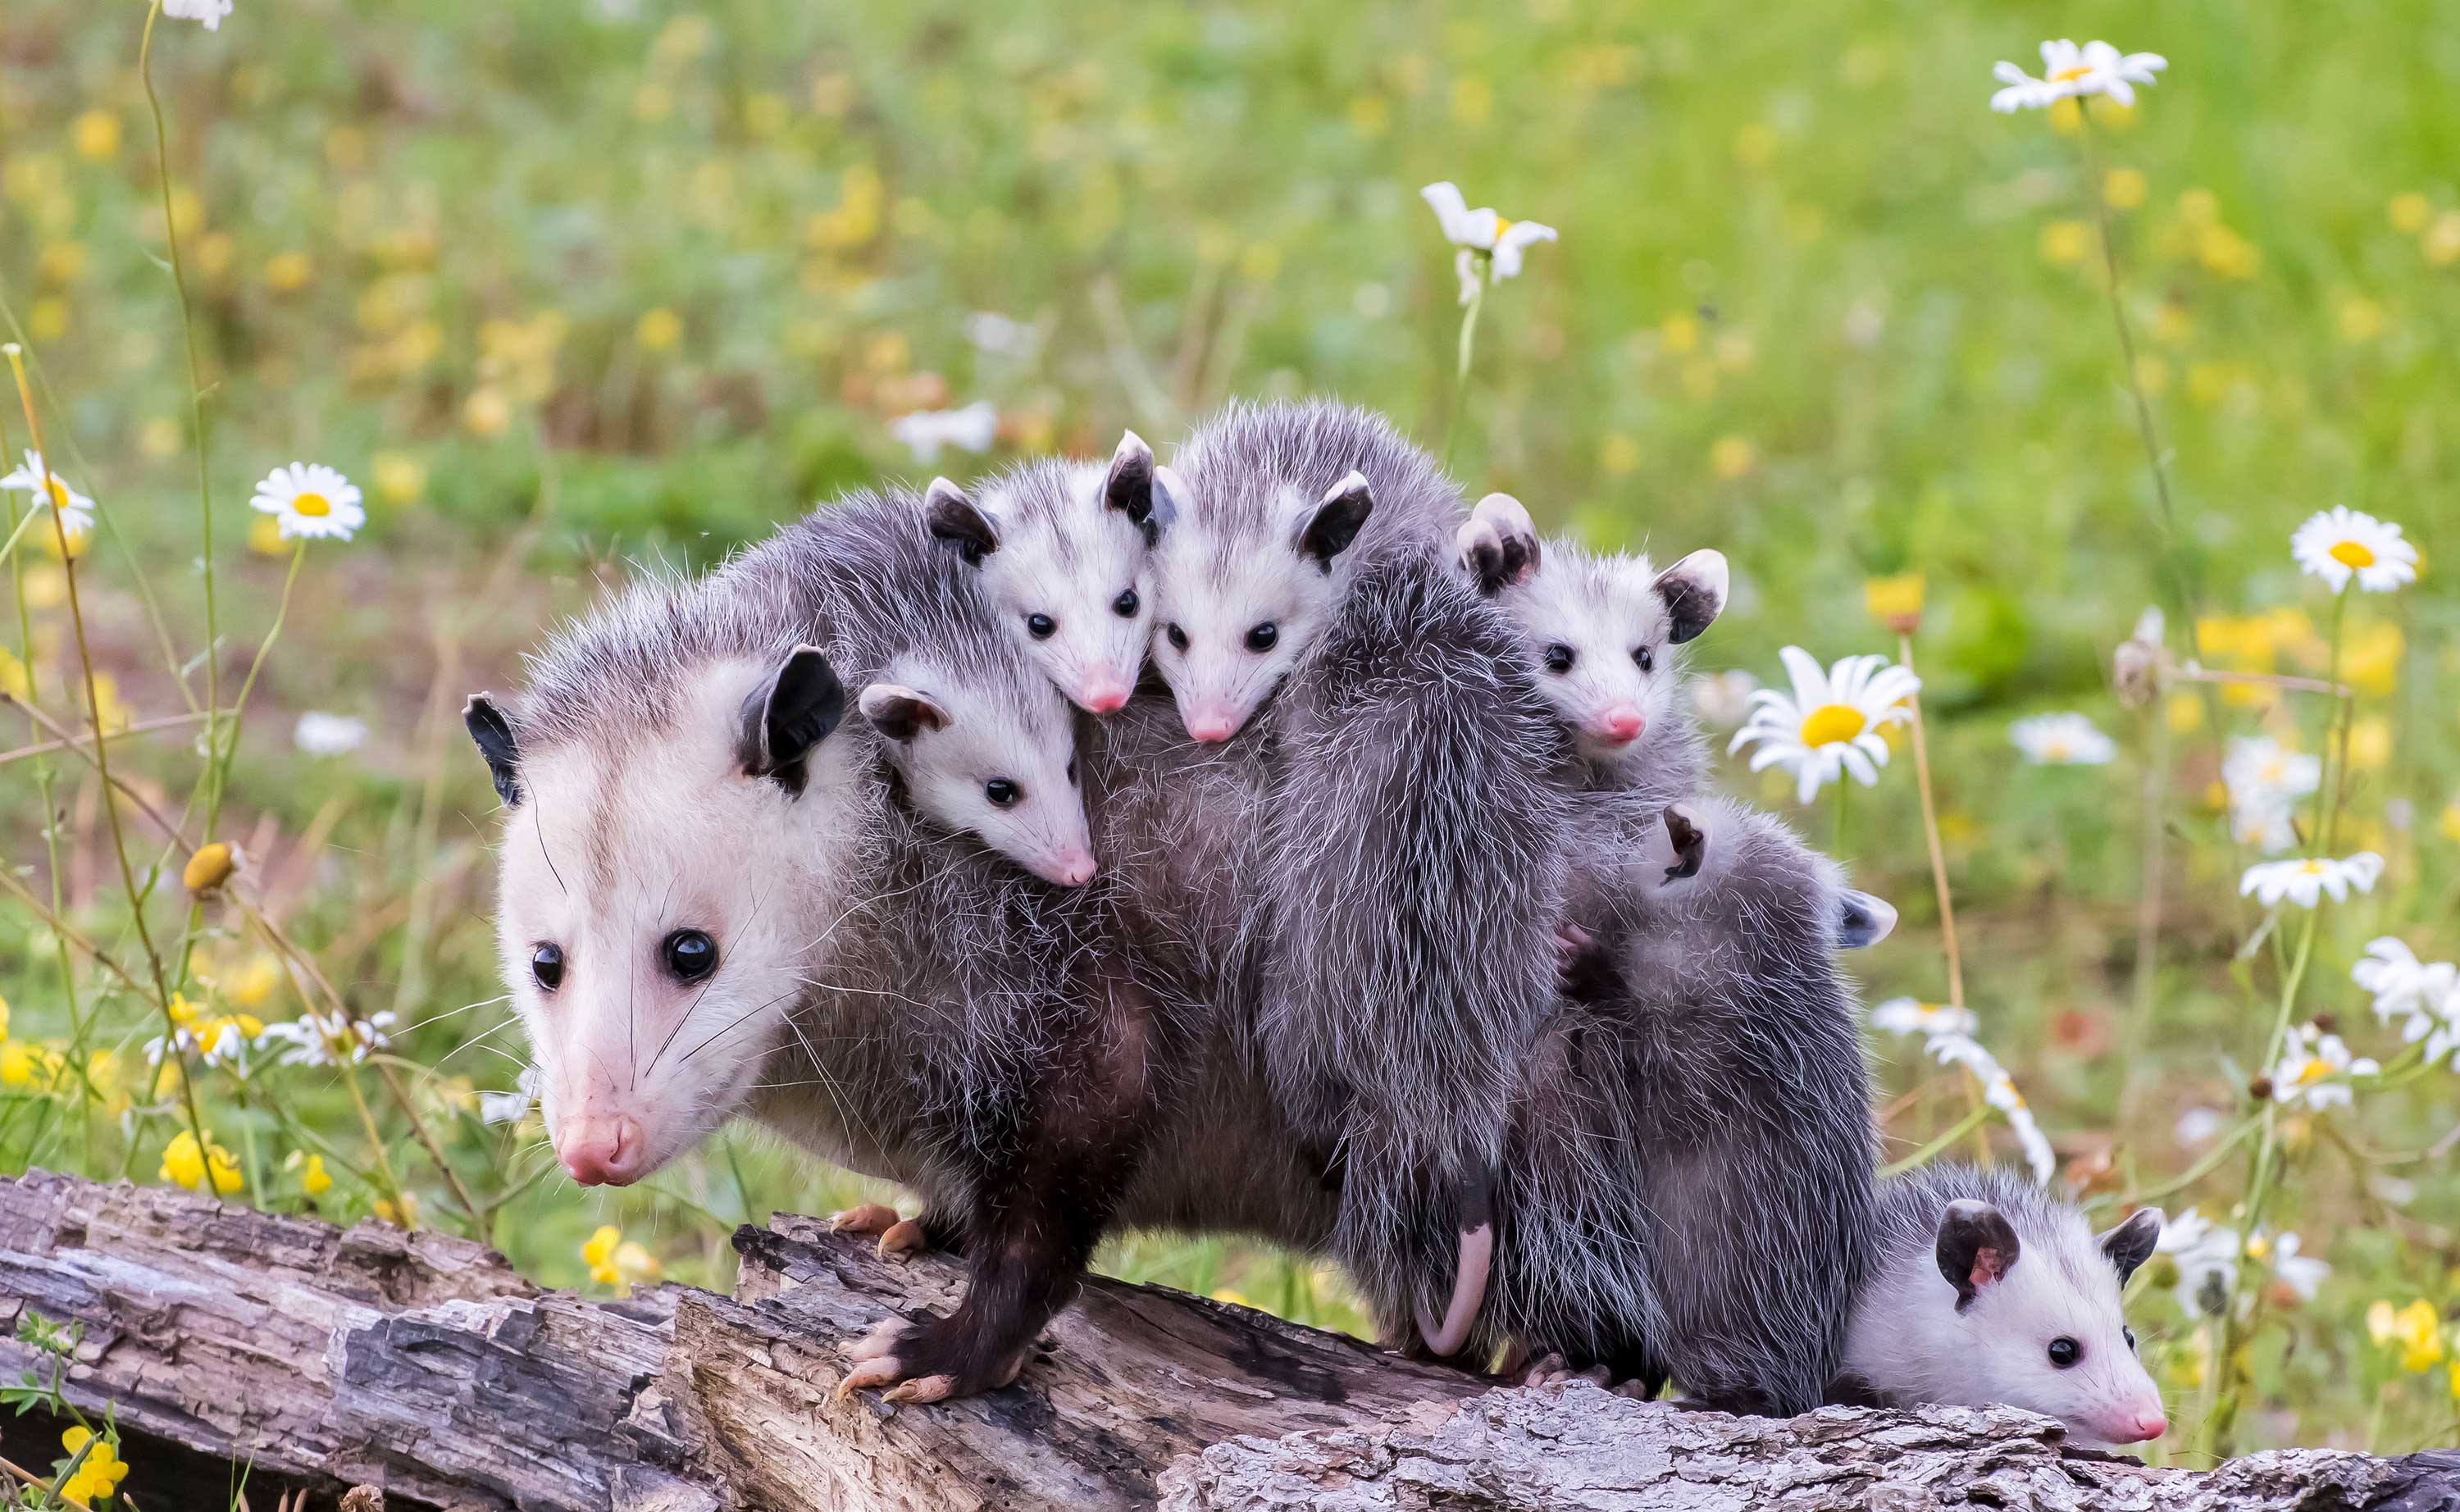 An opossum with babies on its back.